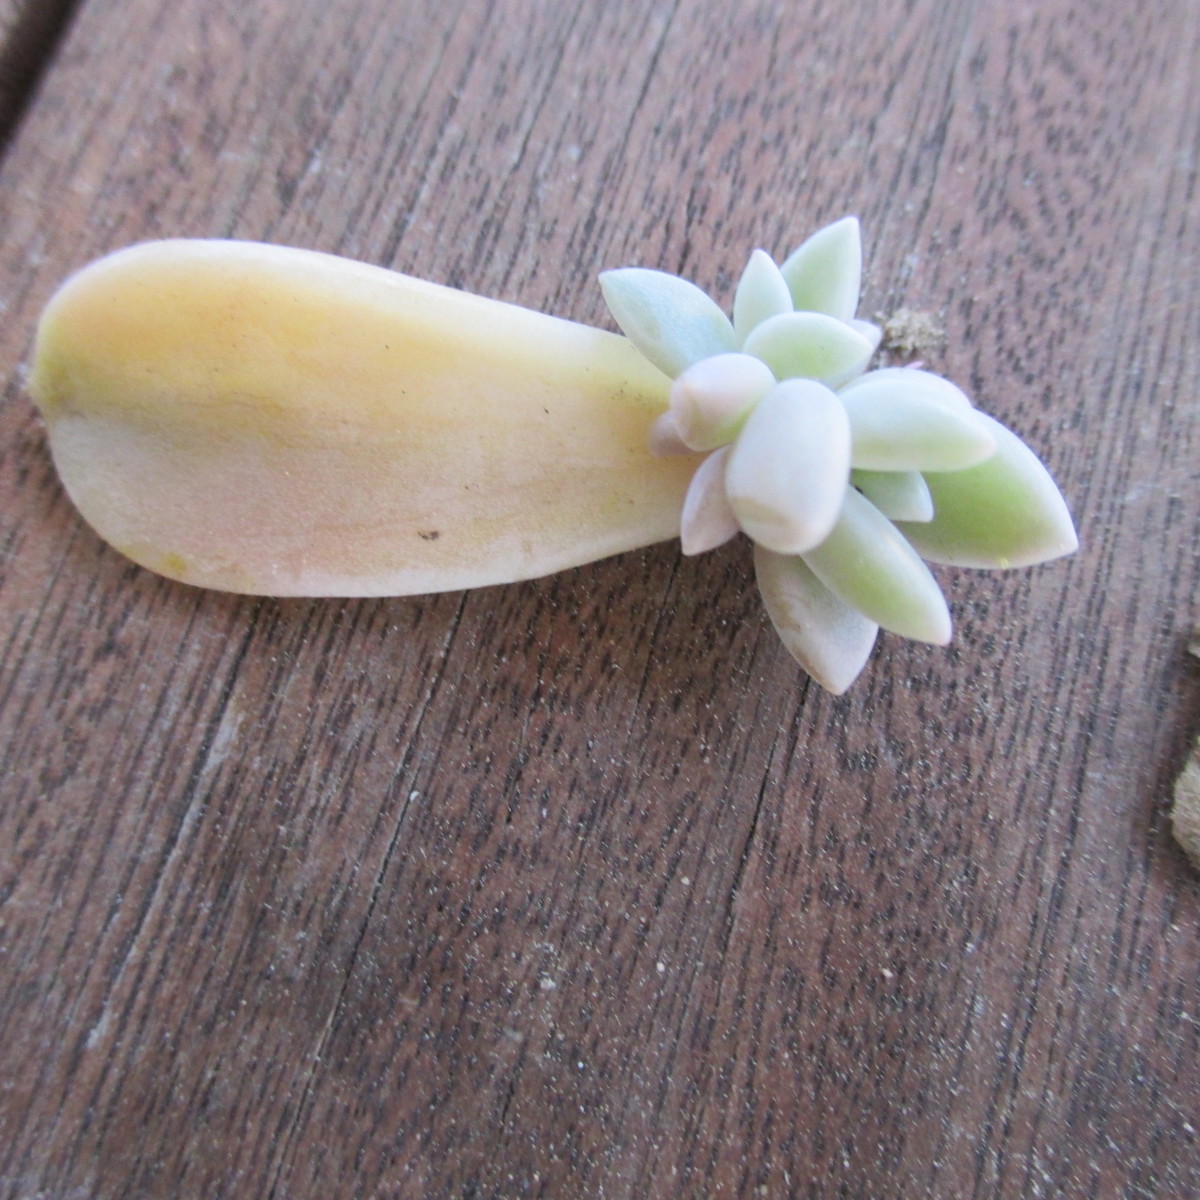 A new baby succulent growing on top of a leaf  that was taken from the Mother Plant